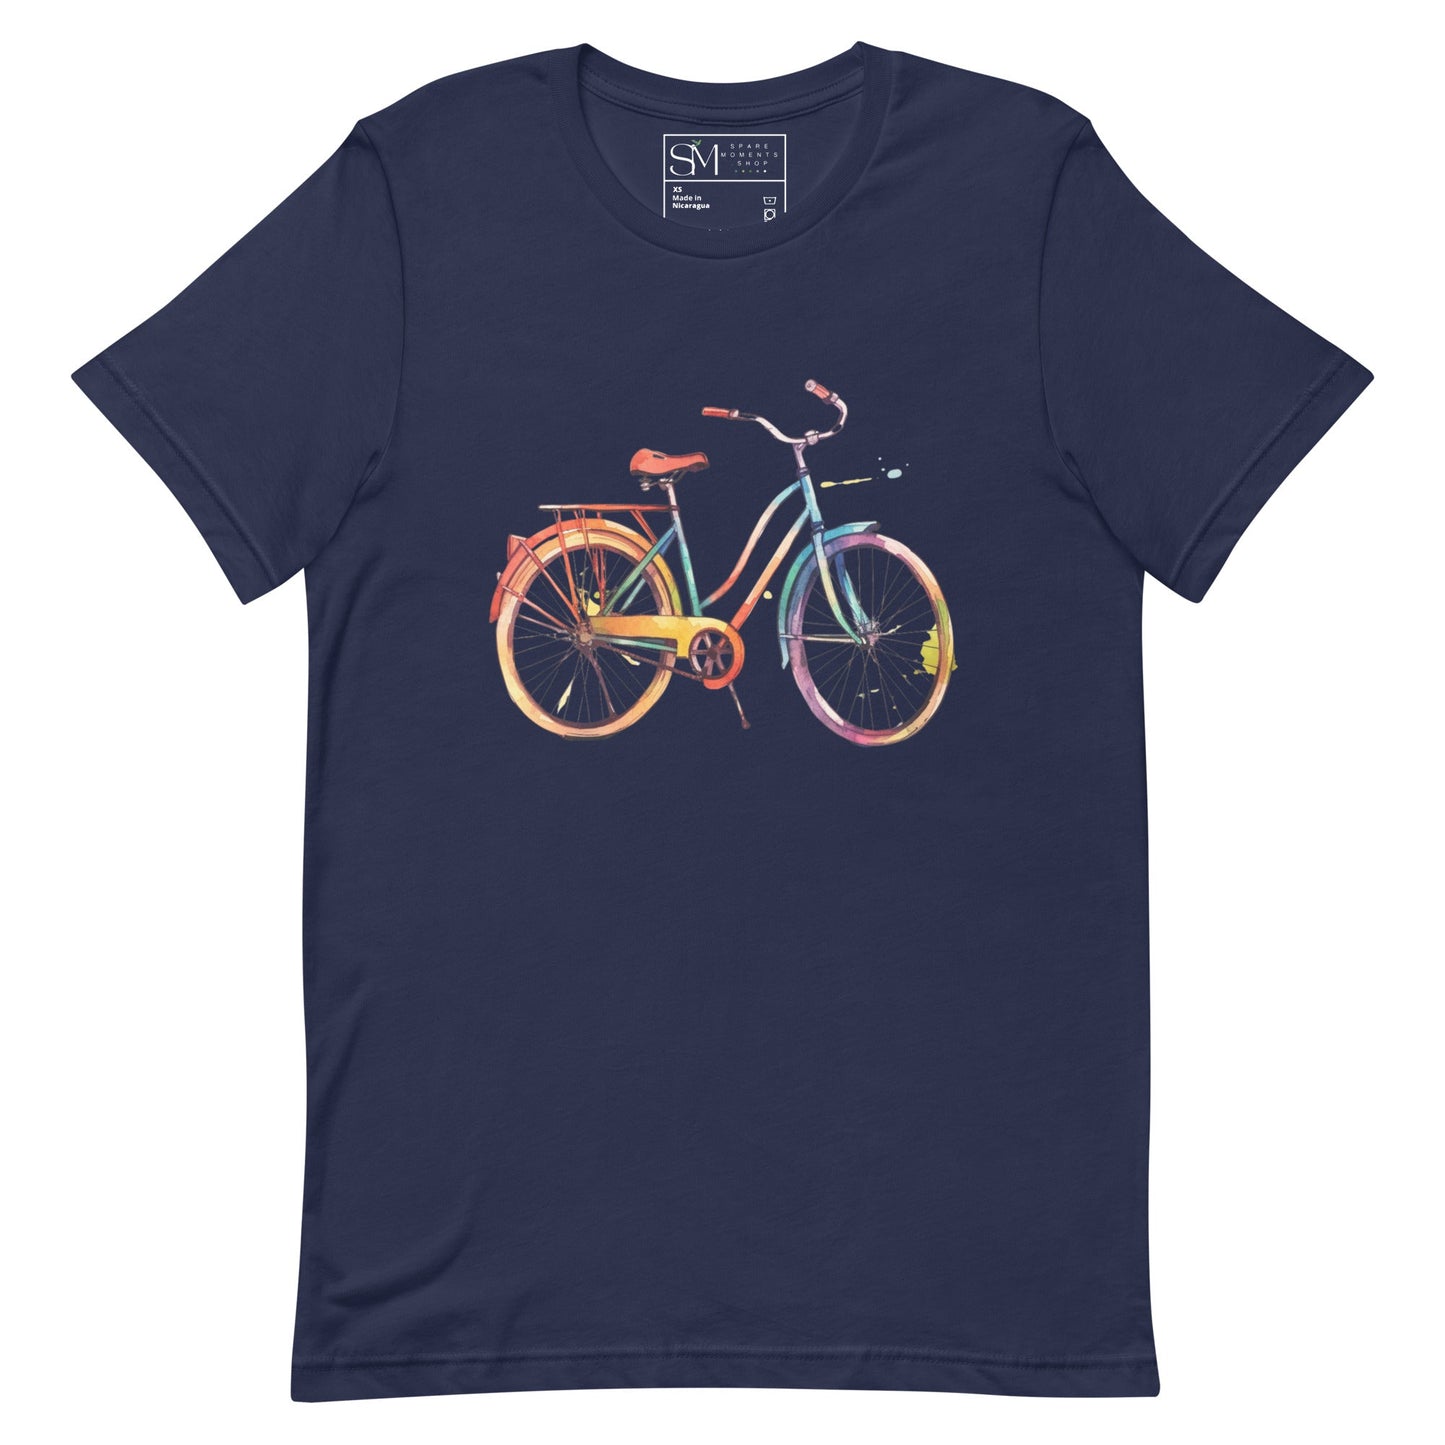 Colorful Bicycle | Unisex t-shirt